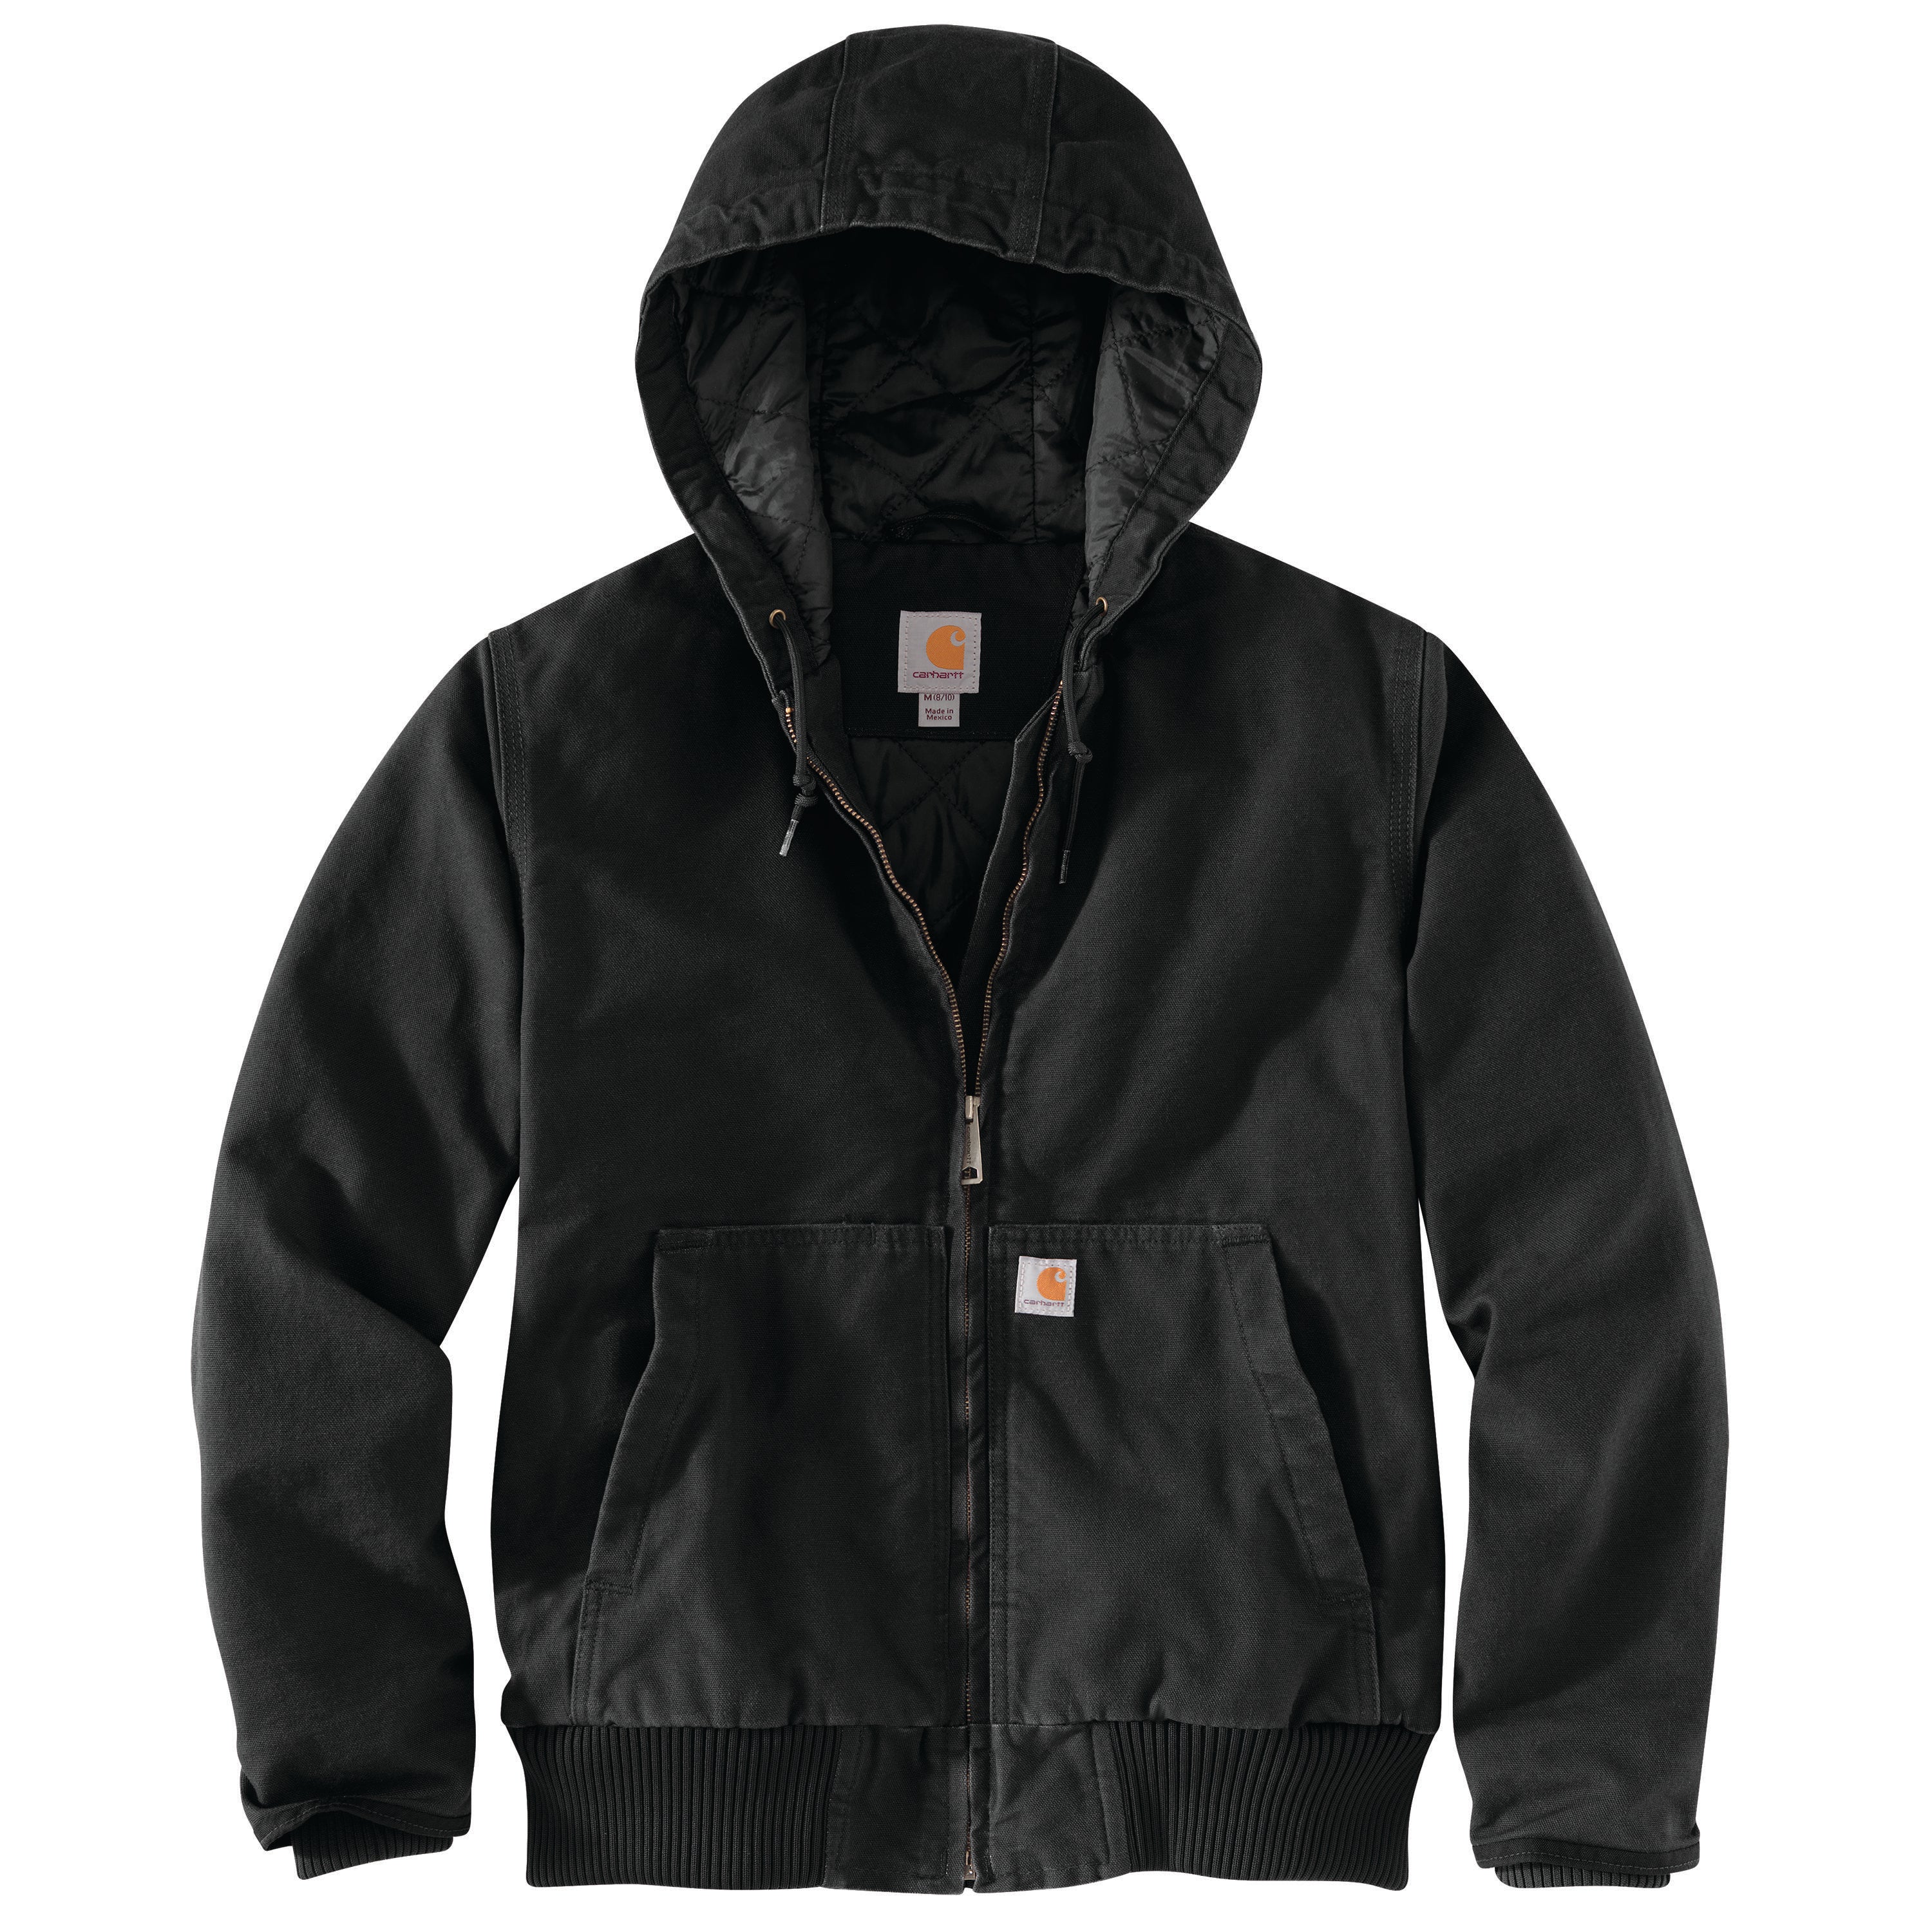 Carhartt Women's Washed Duck Active Jac Black 